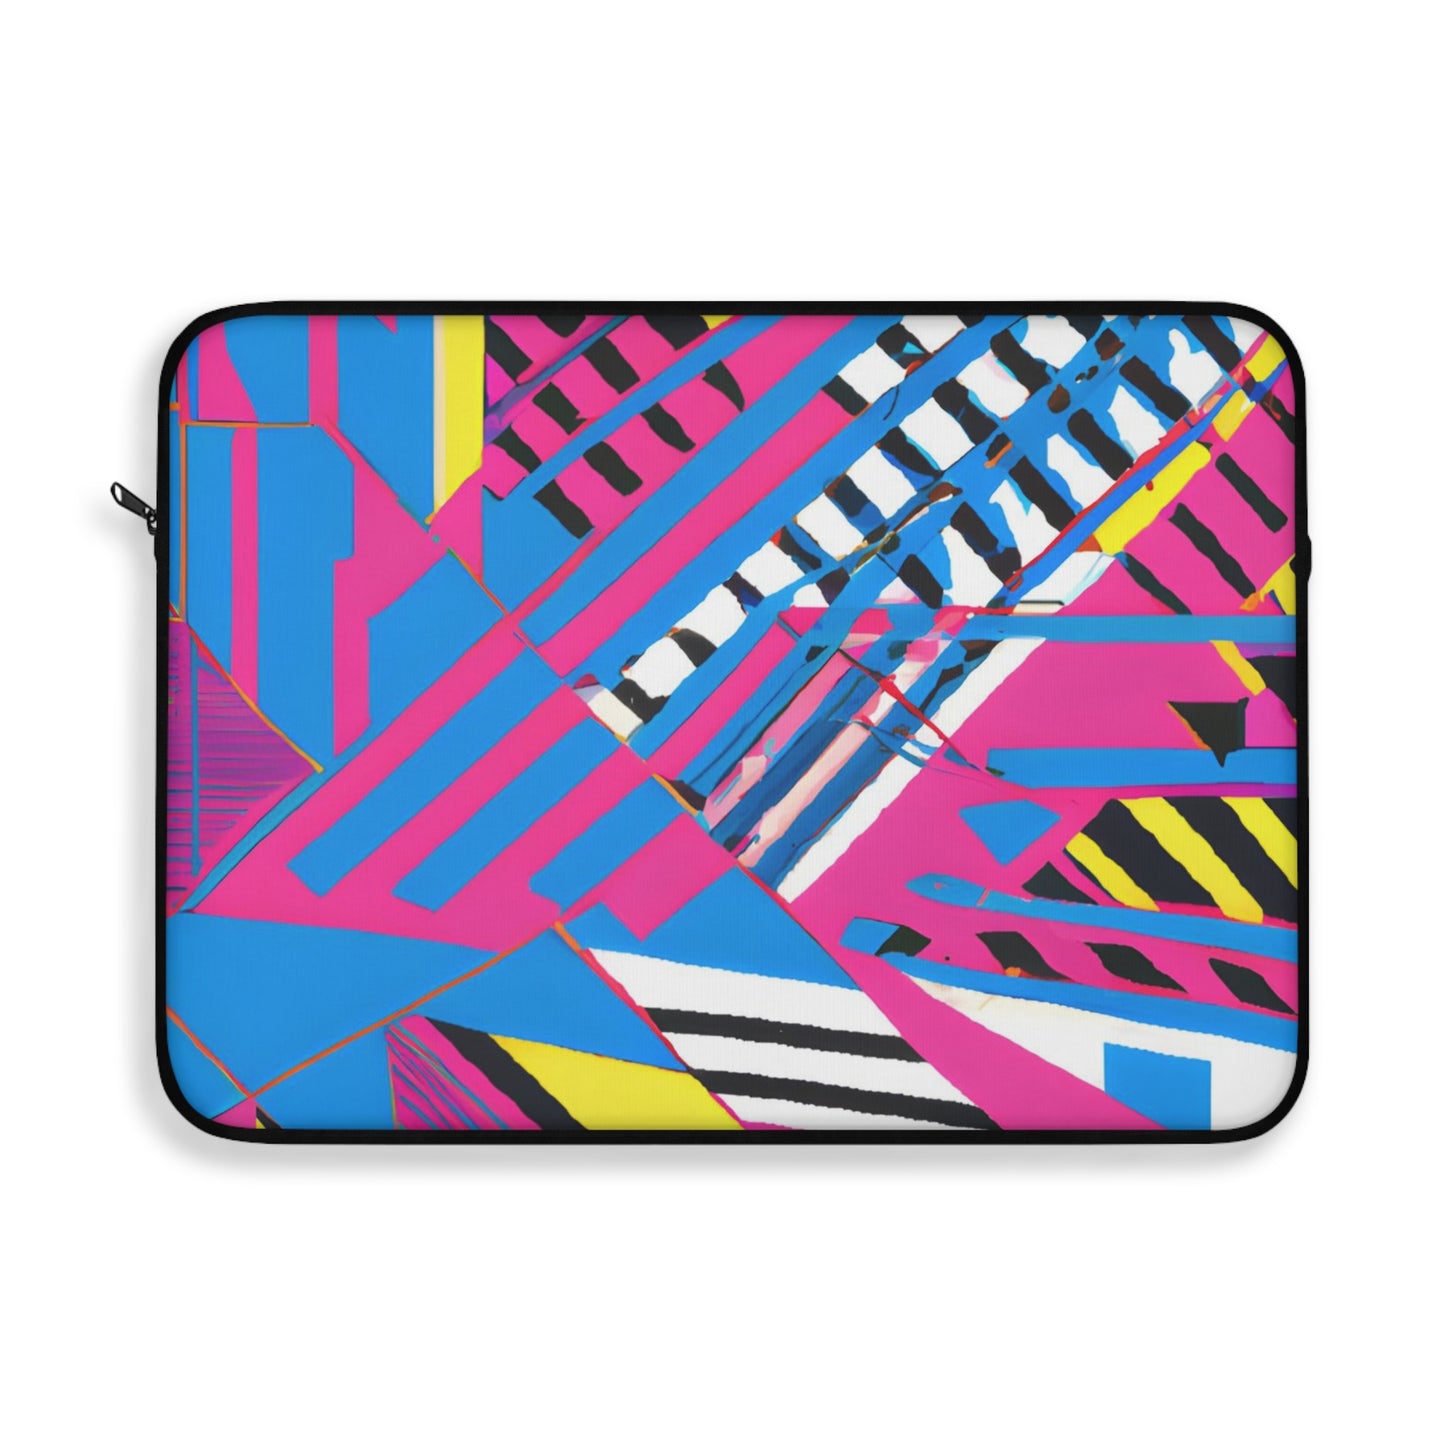 StardustGlimmer - Gay-Inspired Laptop Sleeve (12", 13", 15")